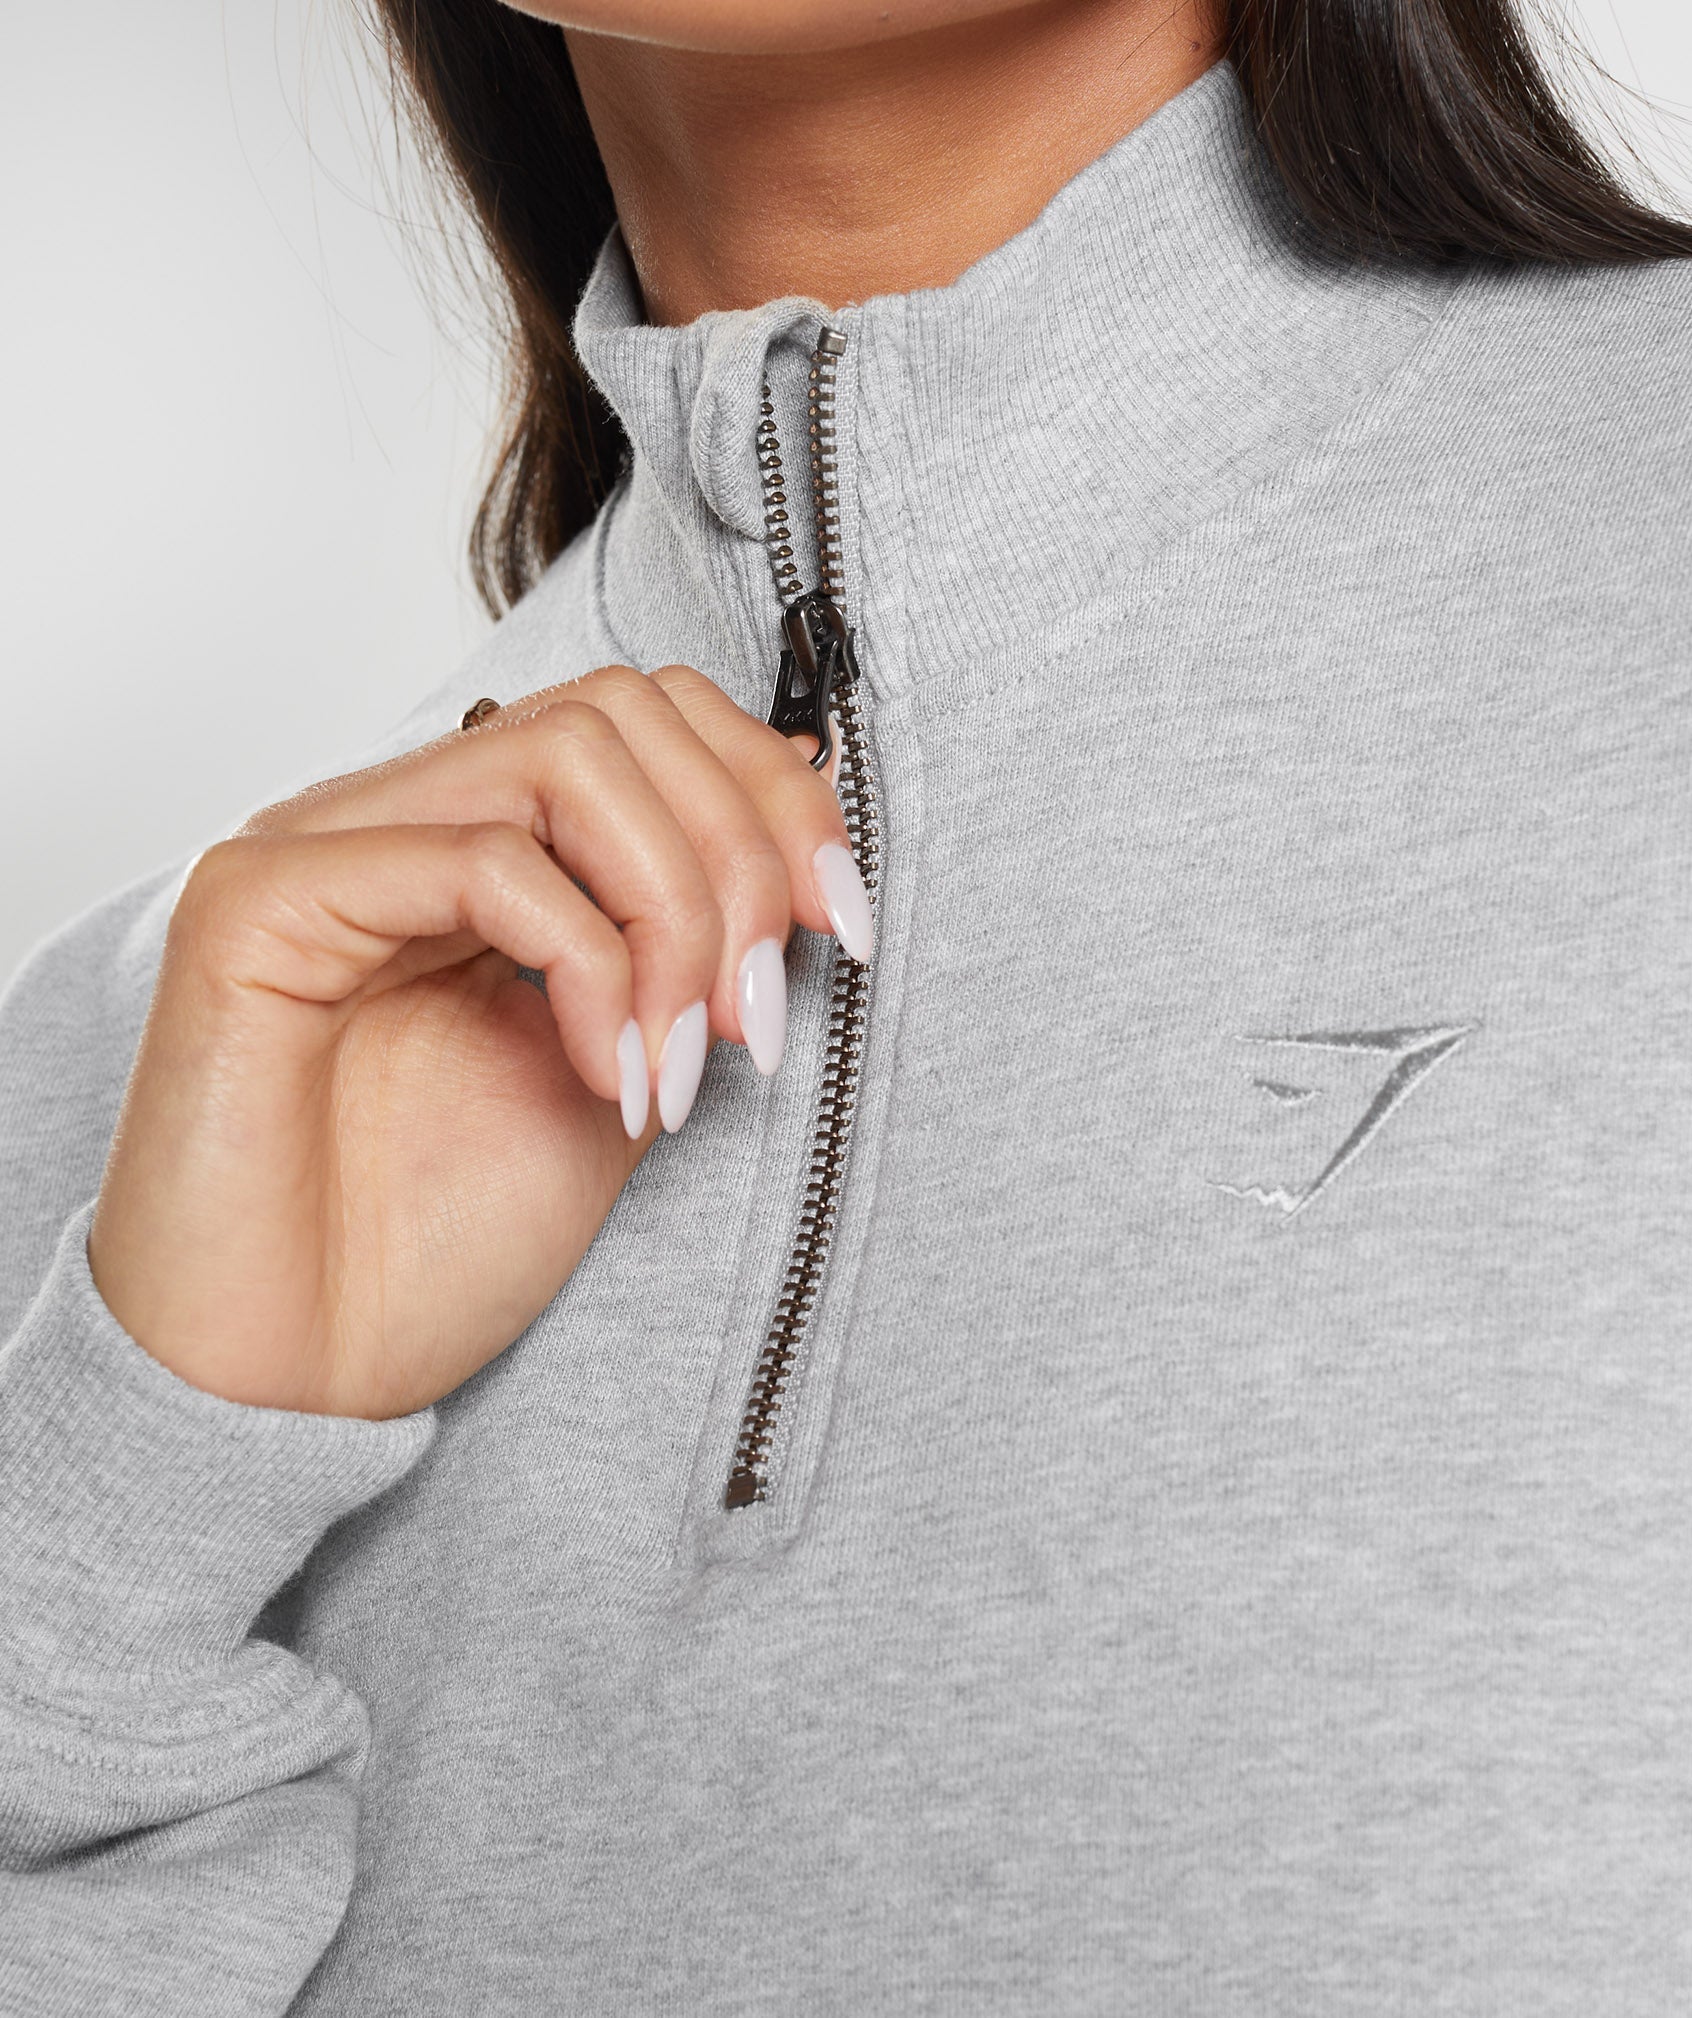 Rest Day Sweats 1/2 Zip Pullover in Light Grey Core Marl - view 6